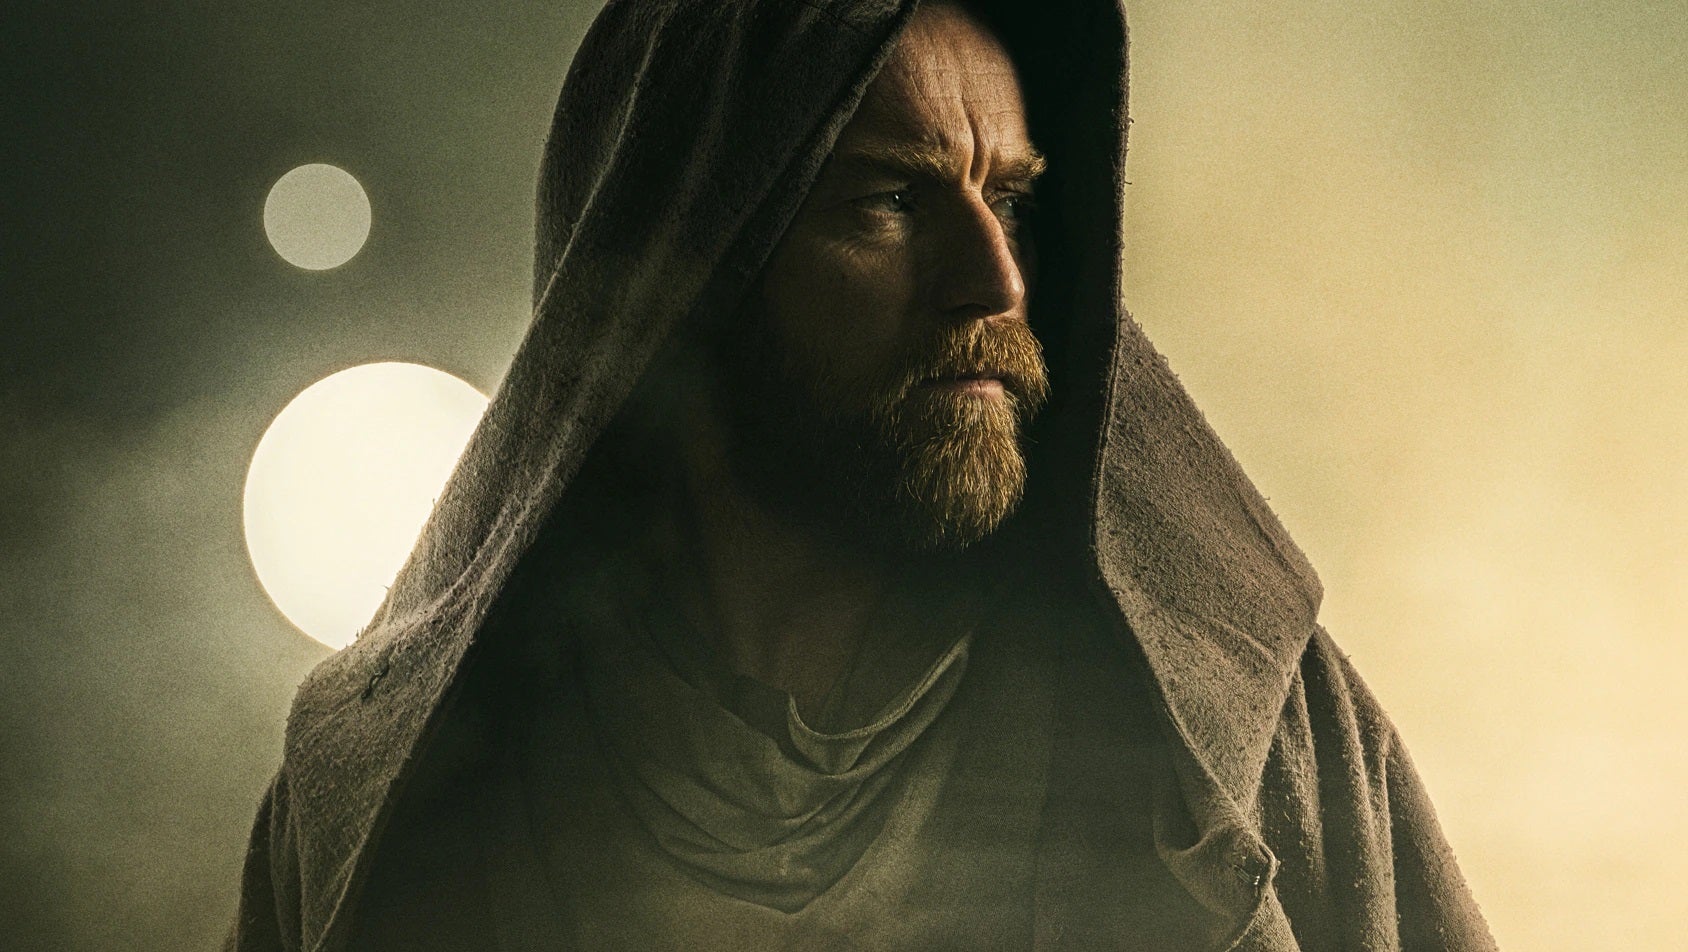 Obi-Wan Kenobi wearing Jedi robes with the two suns of Tattooine behind him